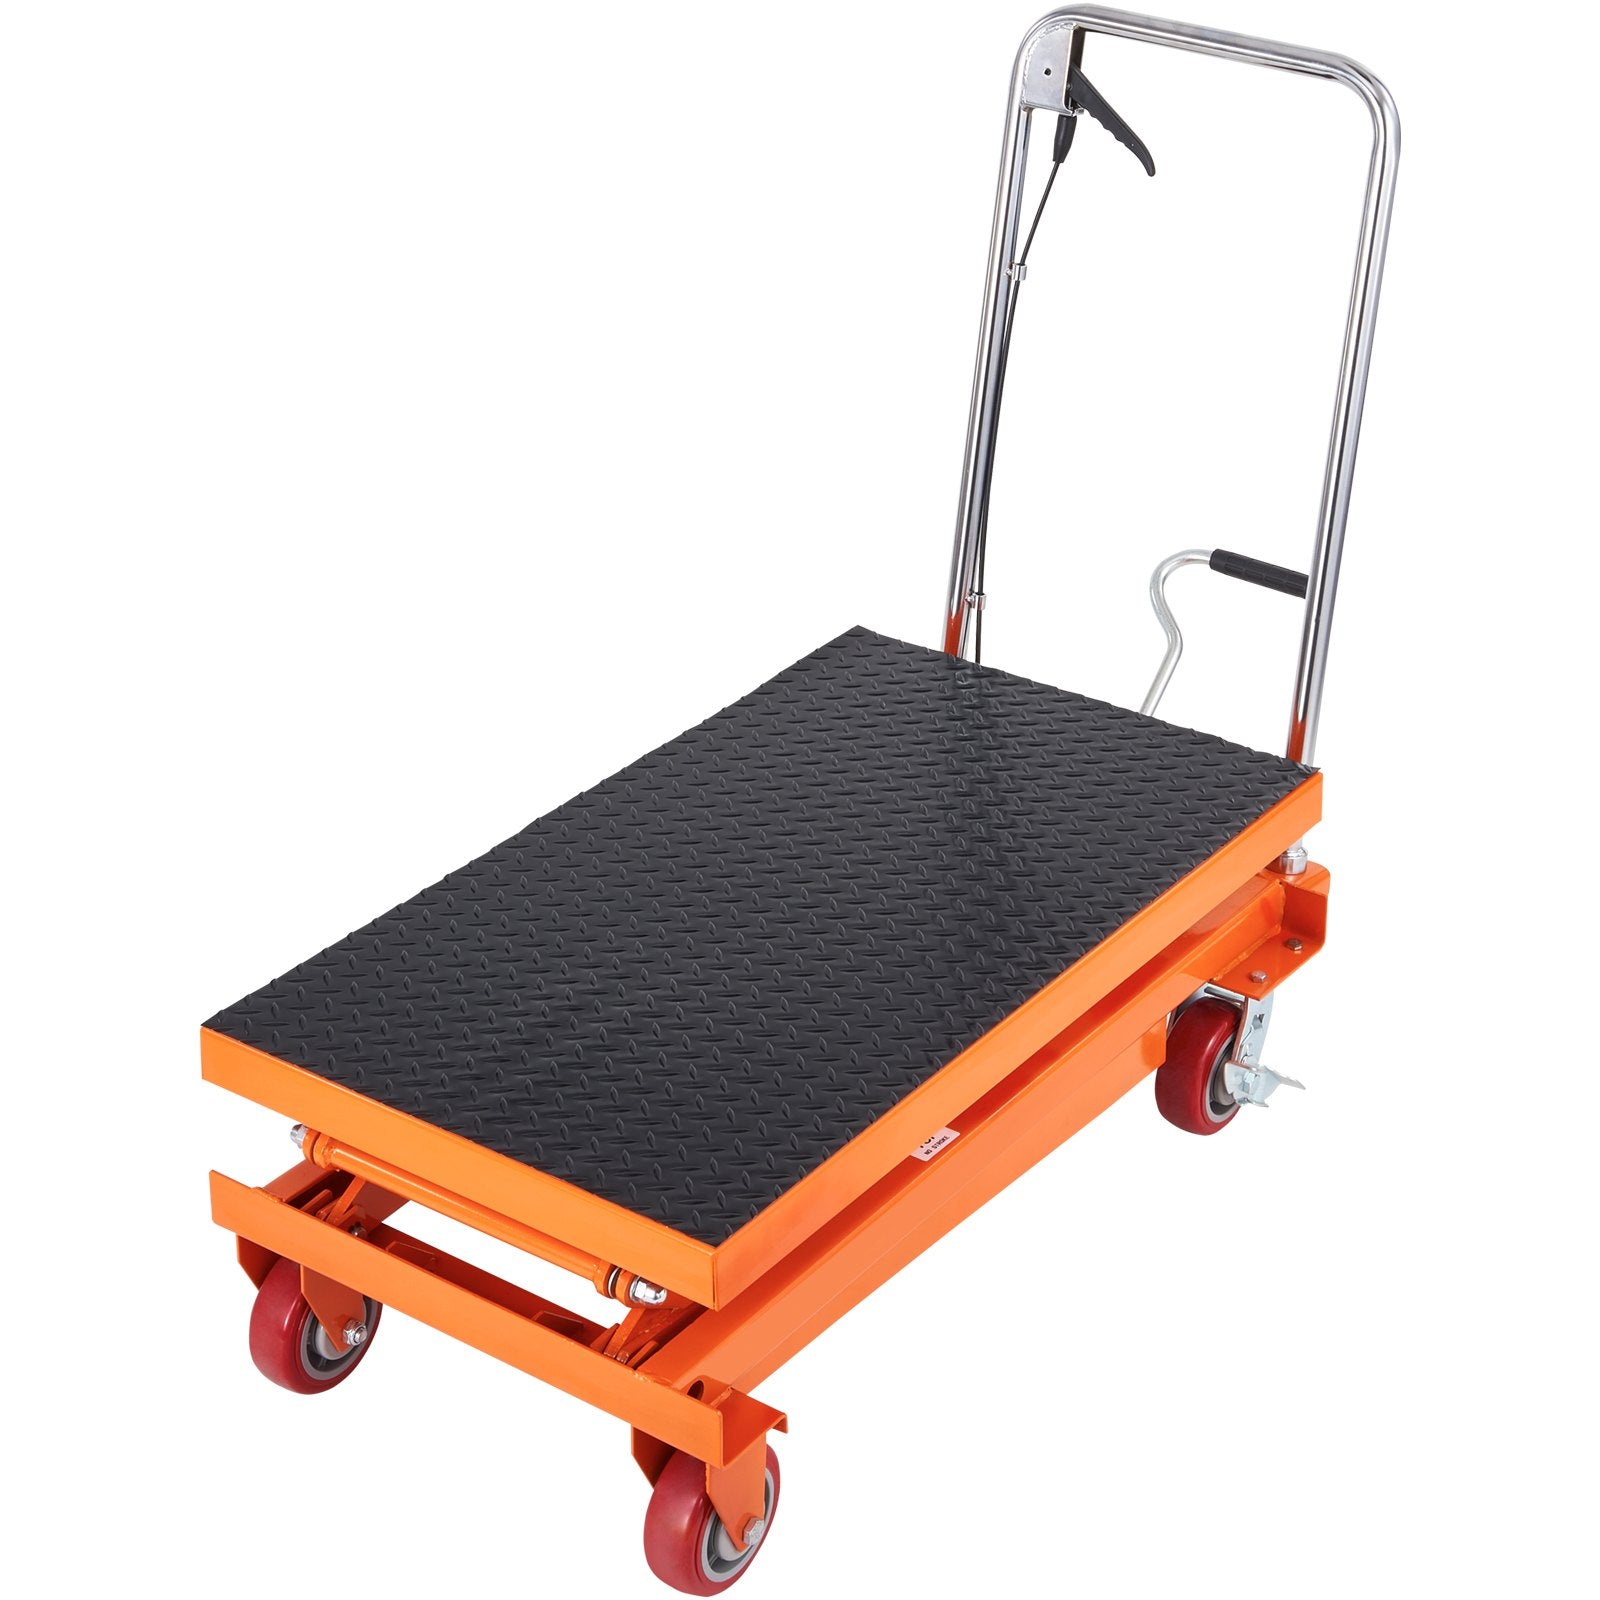 VEVOR Hydraulic Lift Table Cart, 770lbs Capacity 59" Lifting Height, Manual Double Scissor Lift Table with 4 Wheels and Non-slip Pad